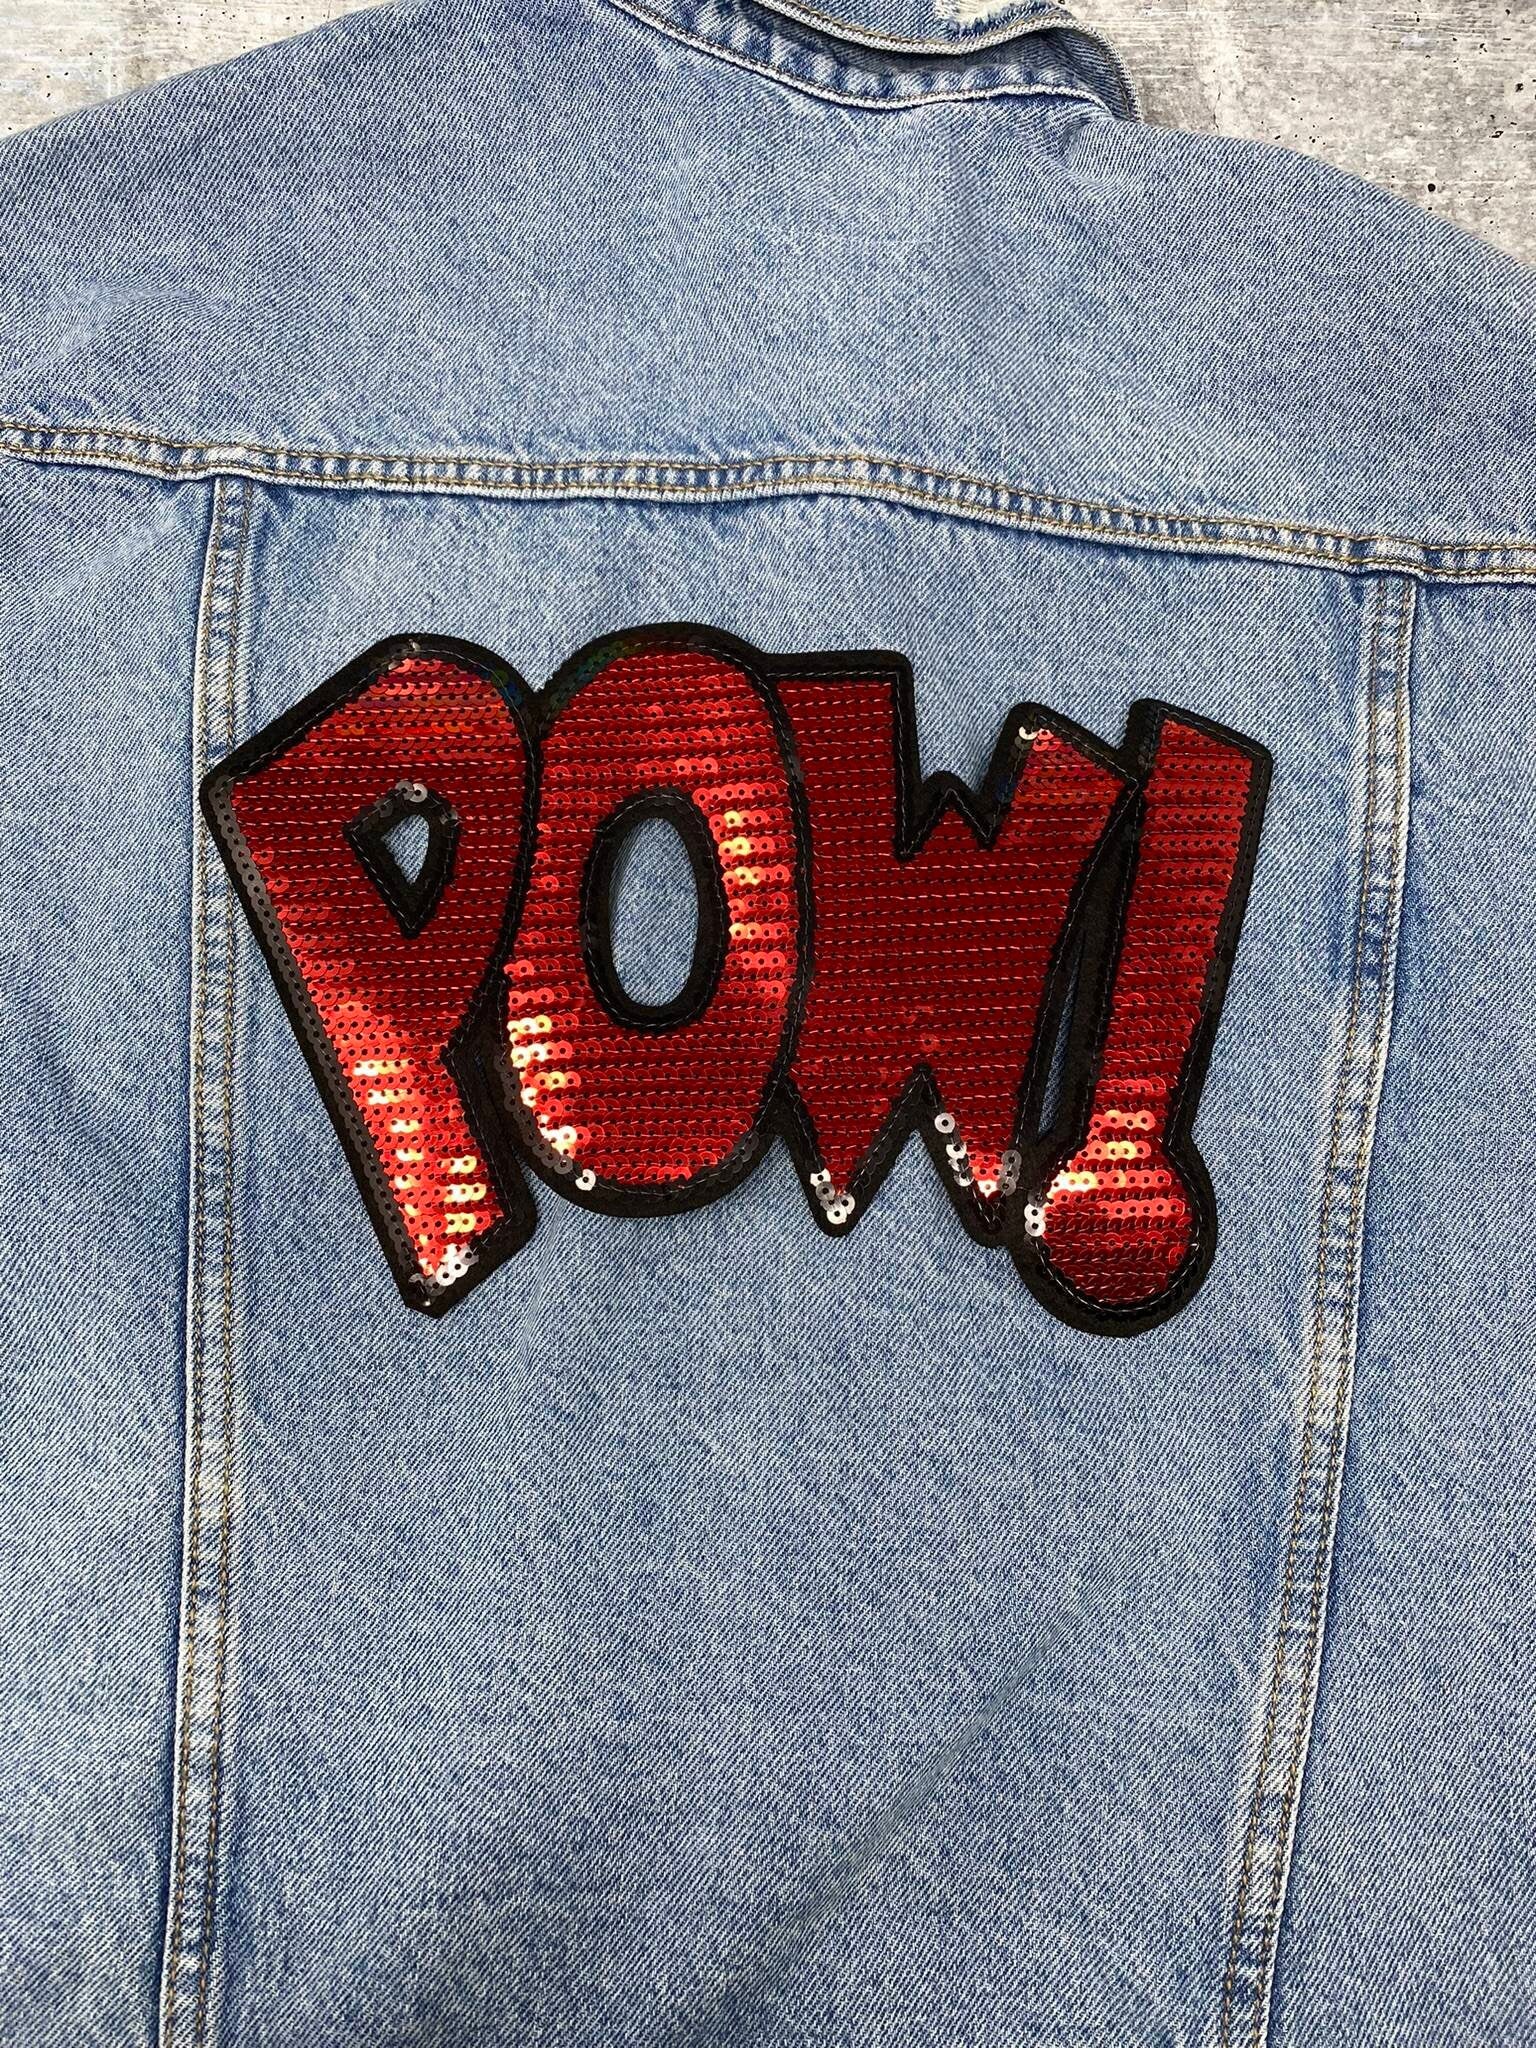 NEW, Red "POW!" Sequins Sparkling Patch, Large Applique, Statement Patch, Iron-on, Size 10"x6", DIY Jacket, Varsity Jacket, Camo, Hoodie